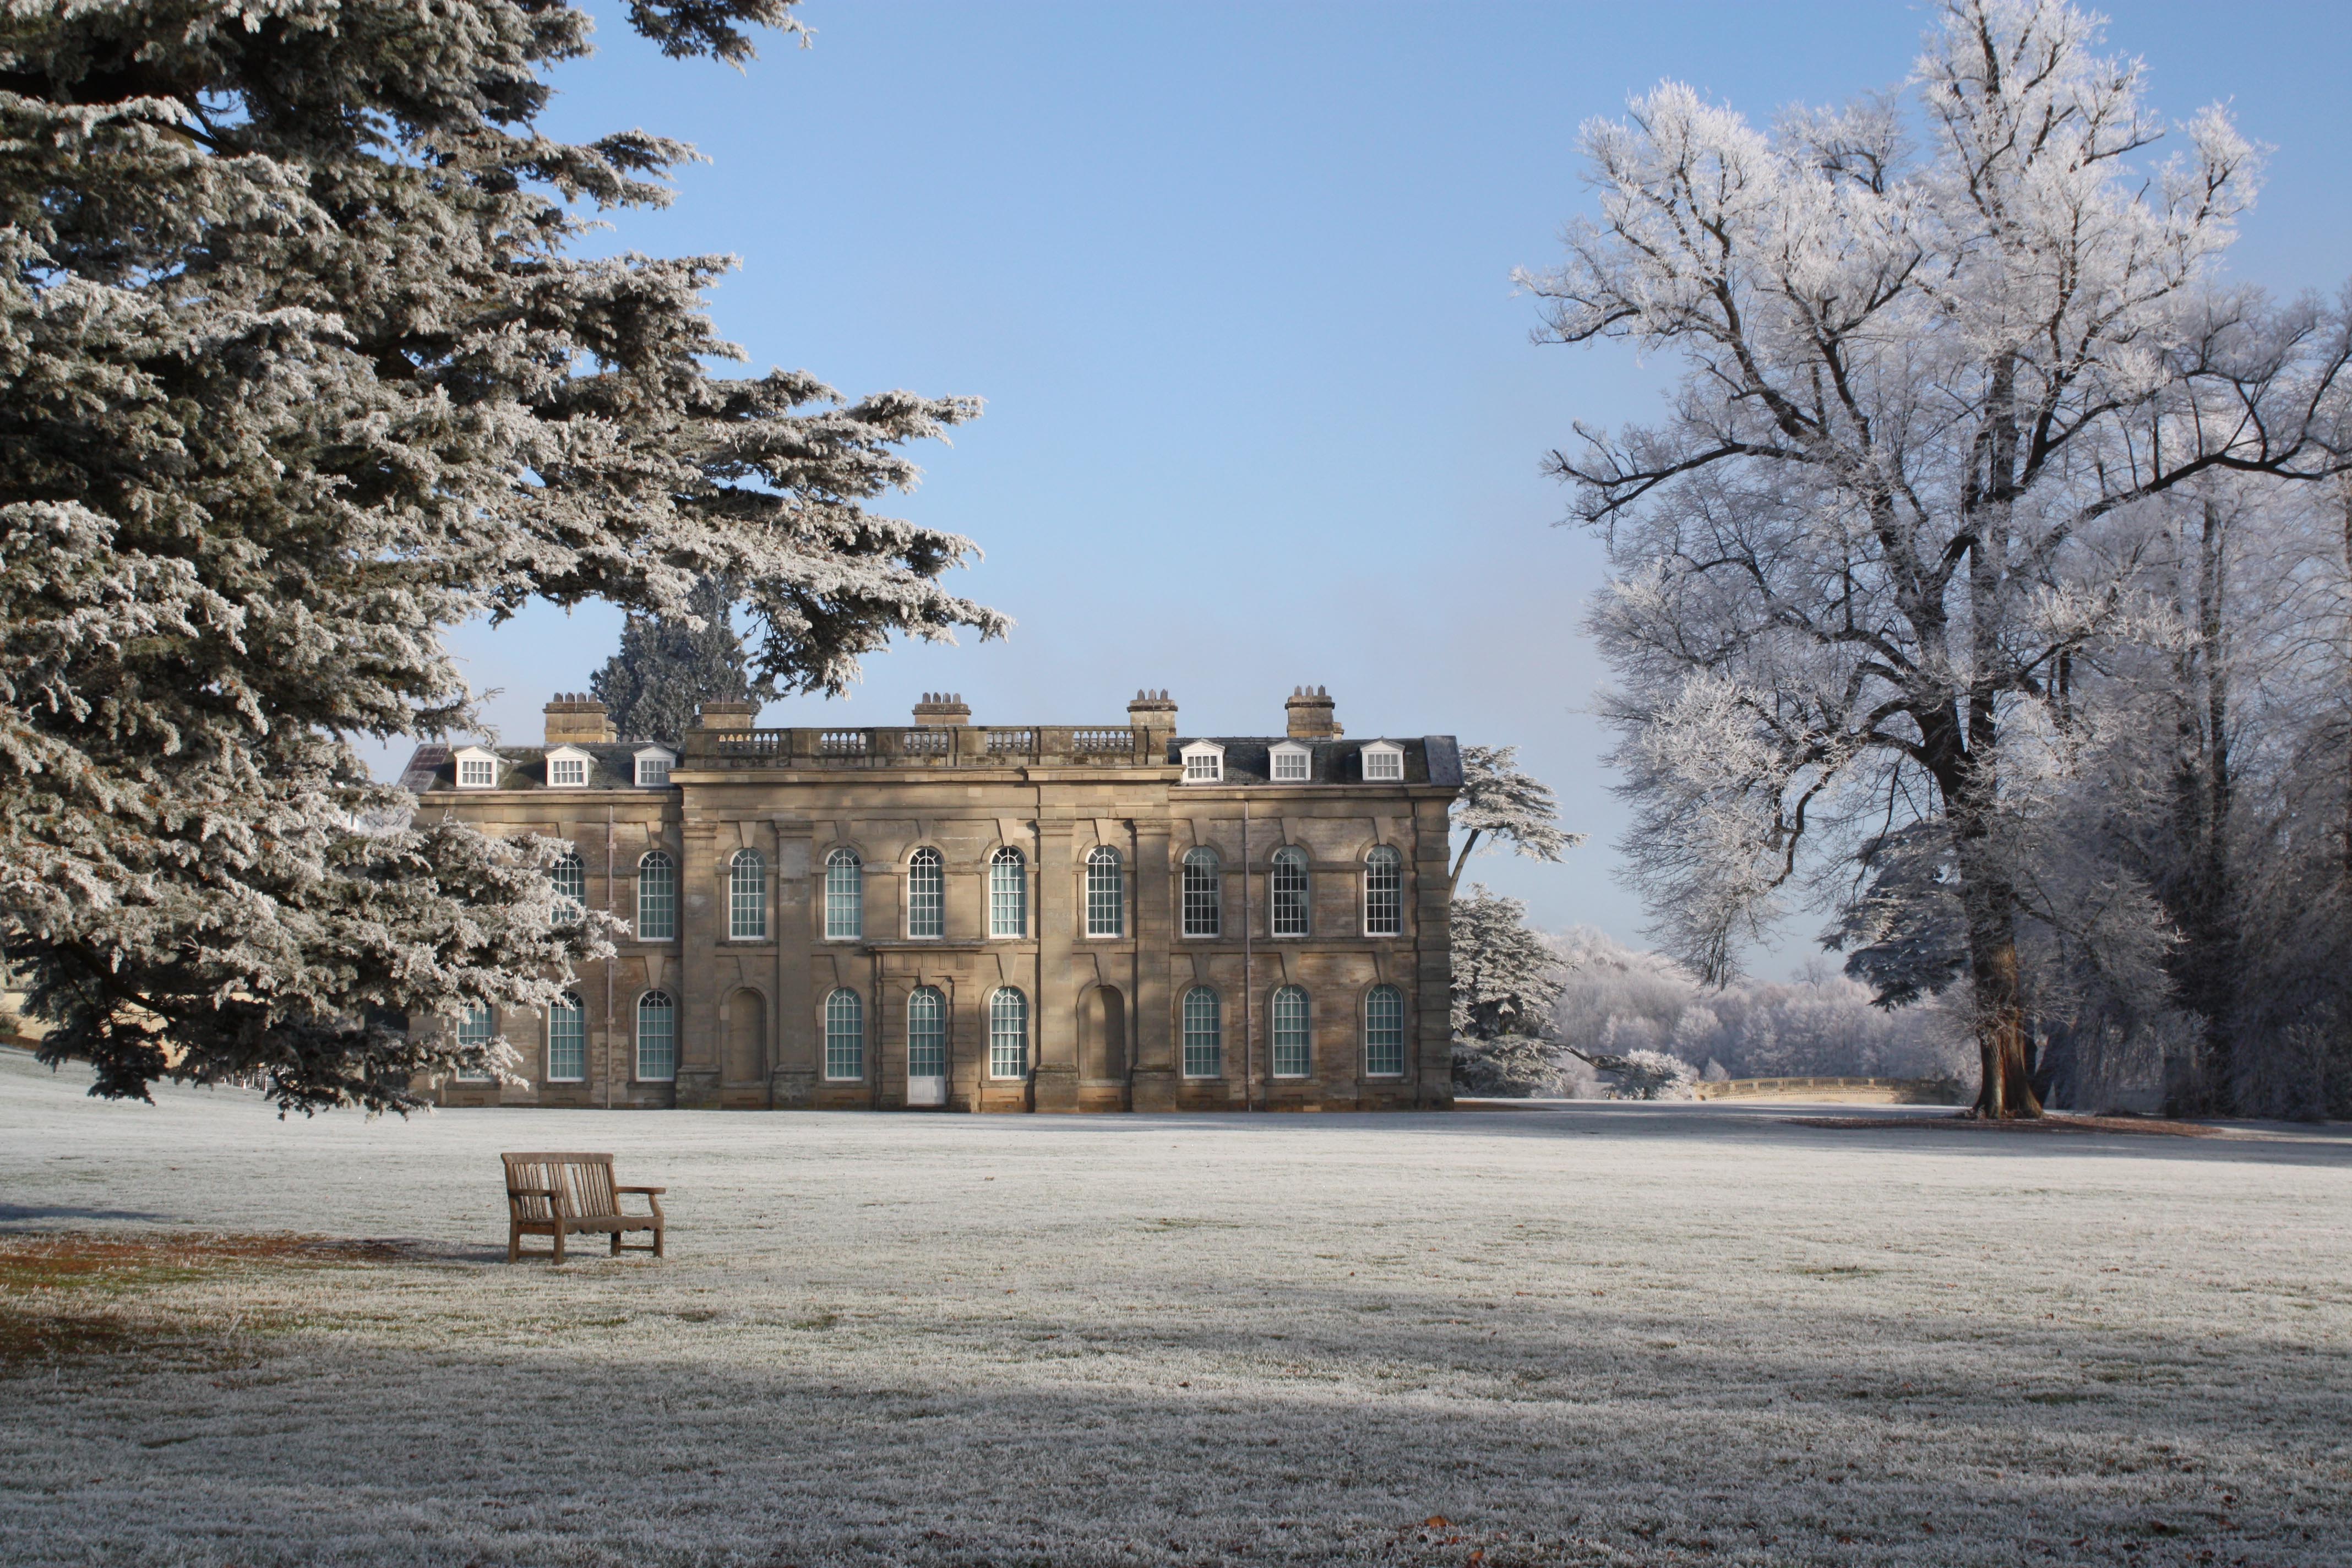 Embrace the ice at Compton Verney